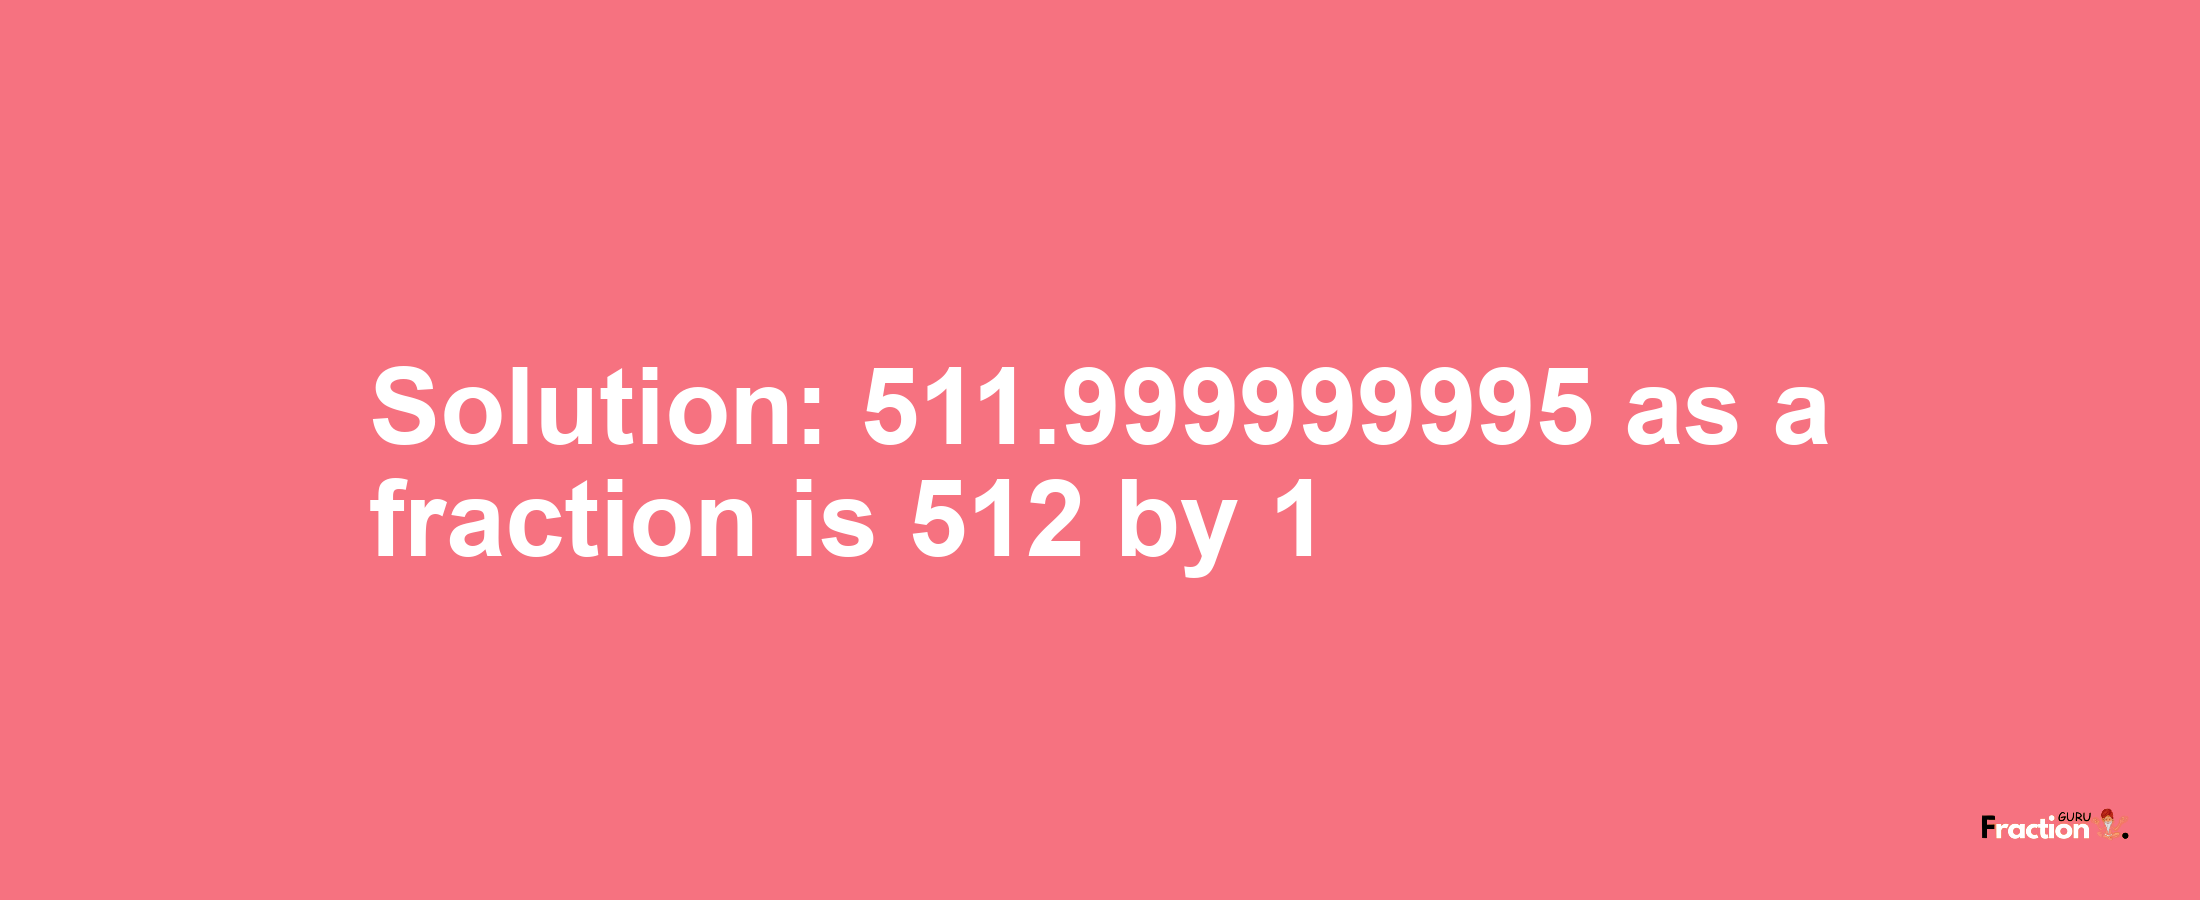 Solution:511.999999995 as a fraction is 512/1